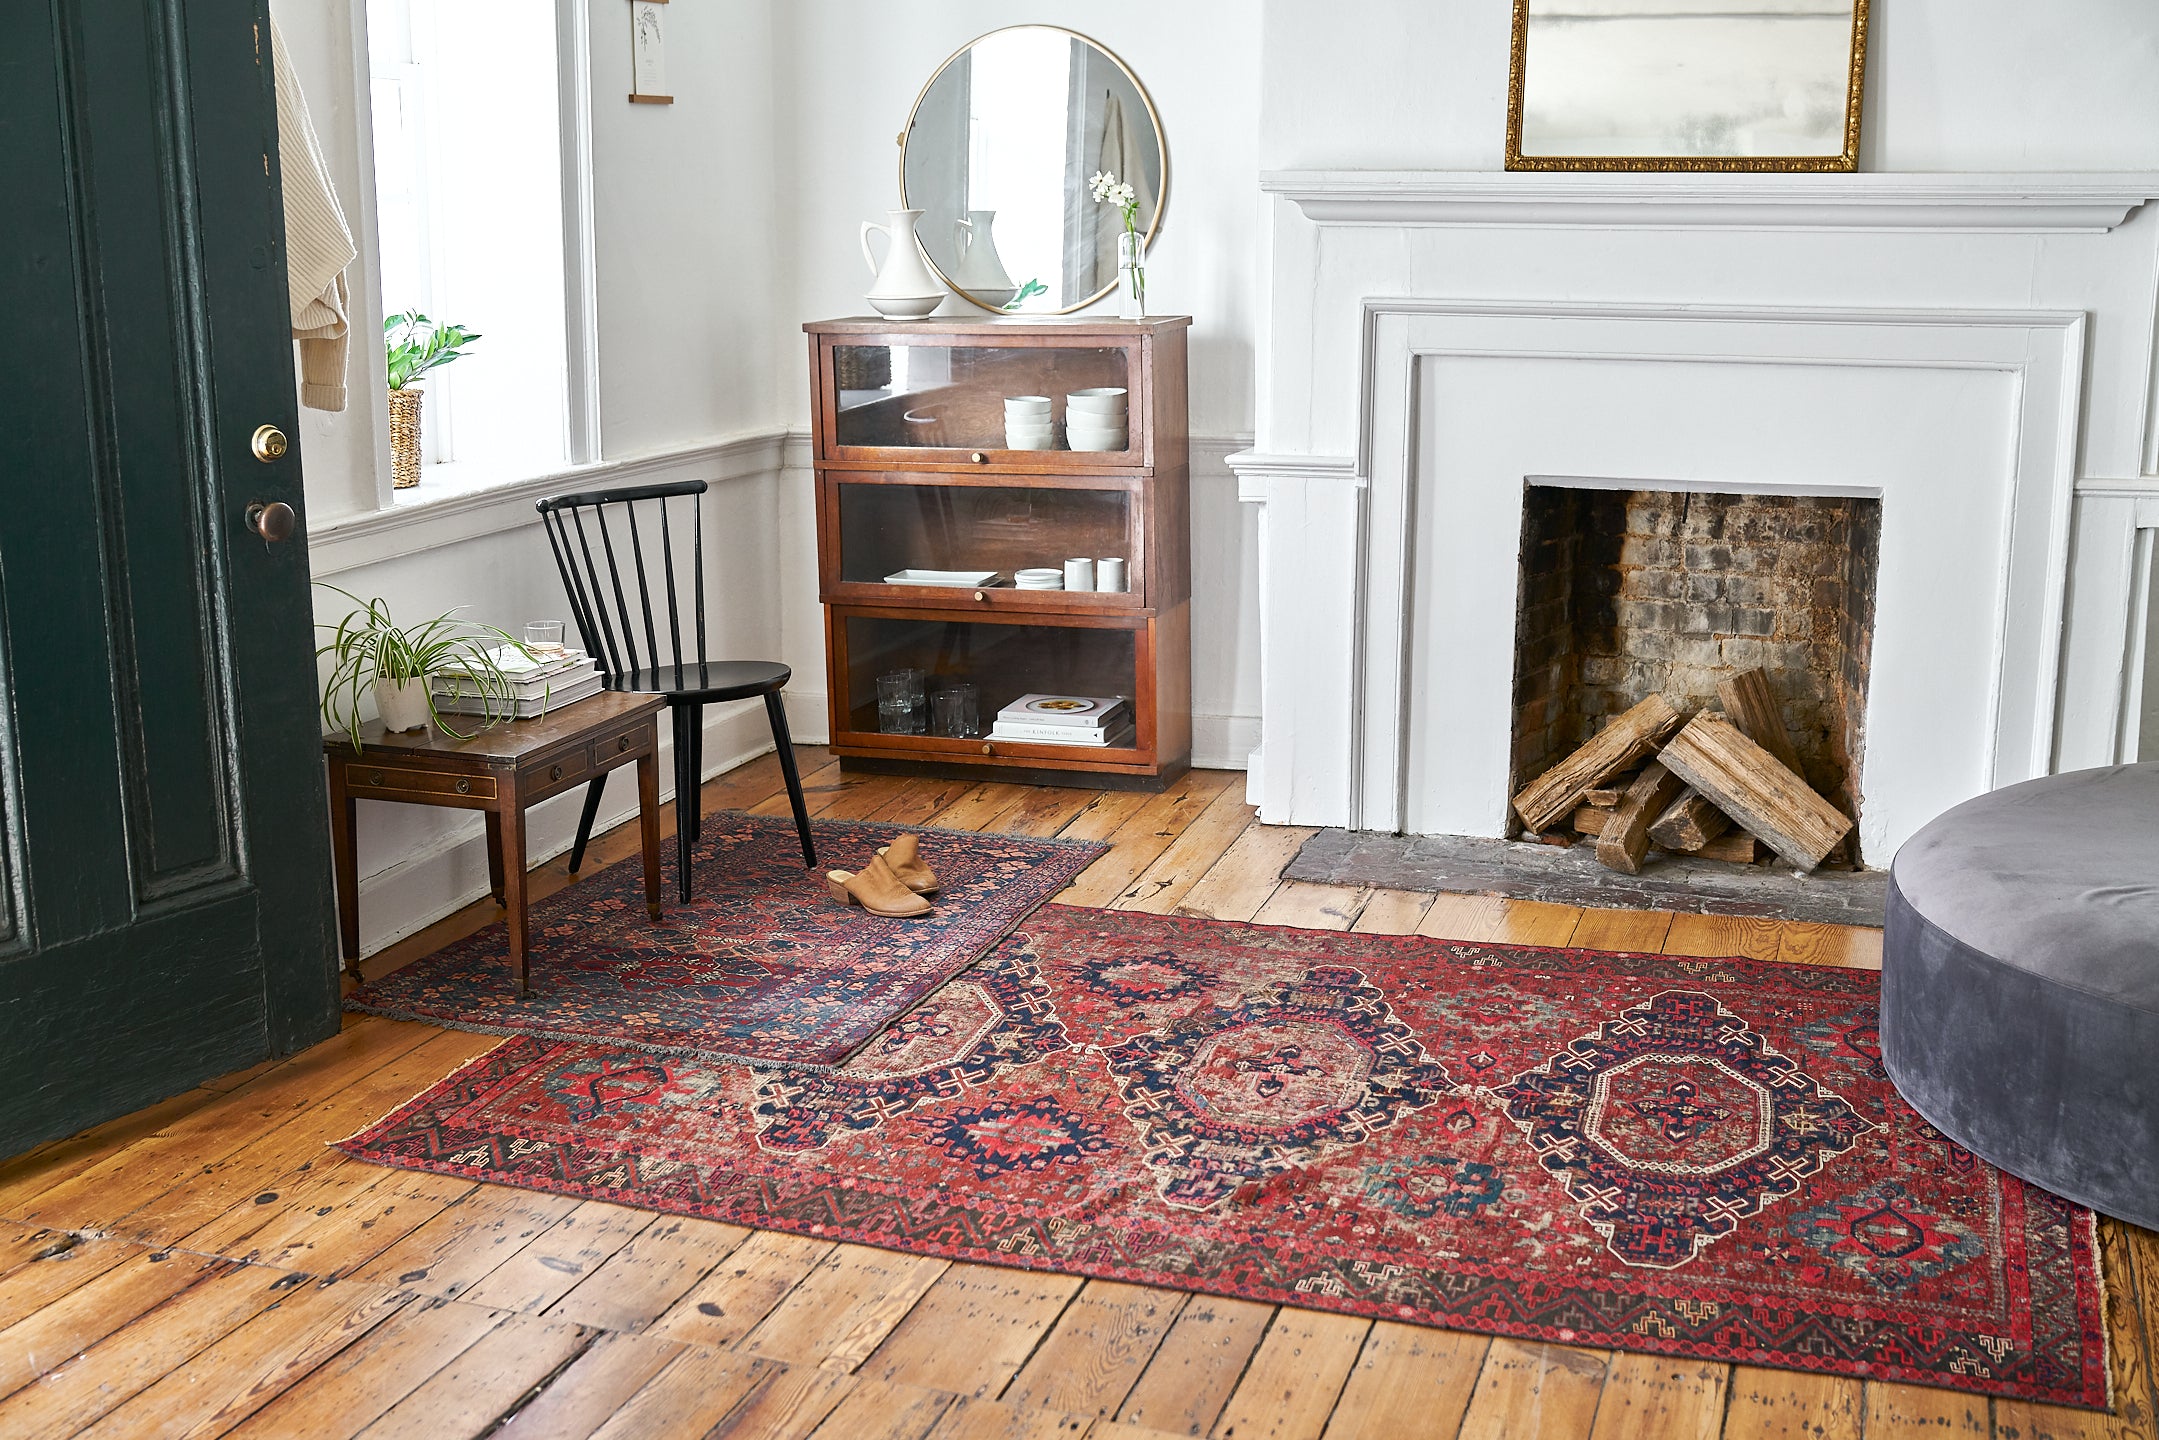 What Size Rug Pad Do I Need for my 9x12 Rug?